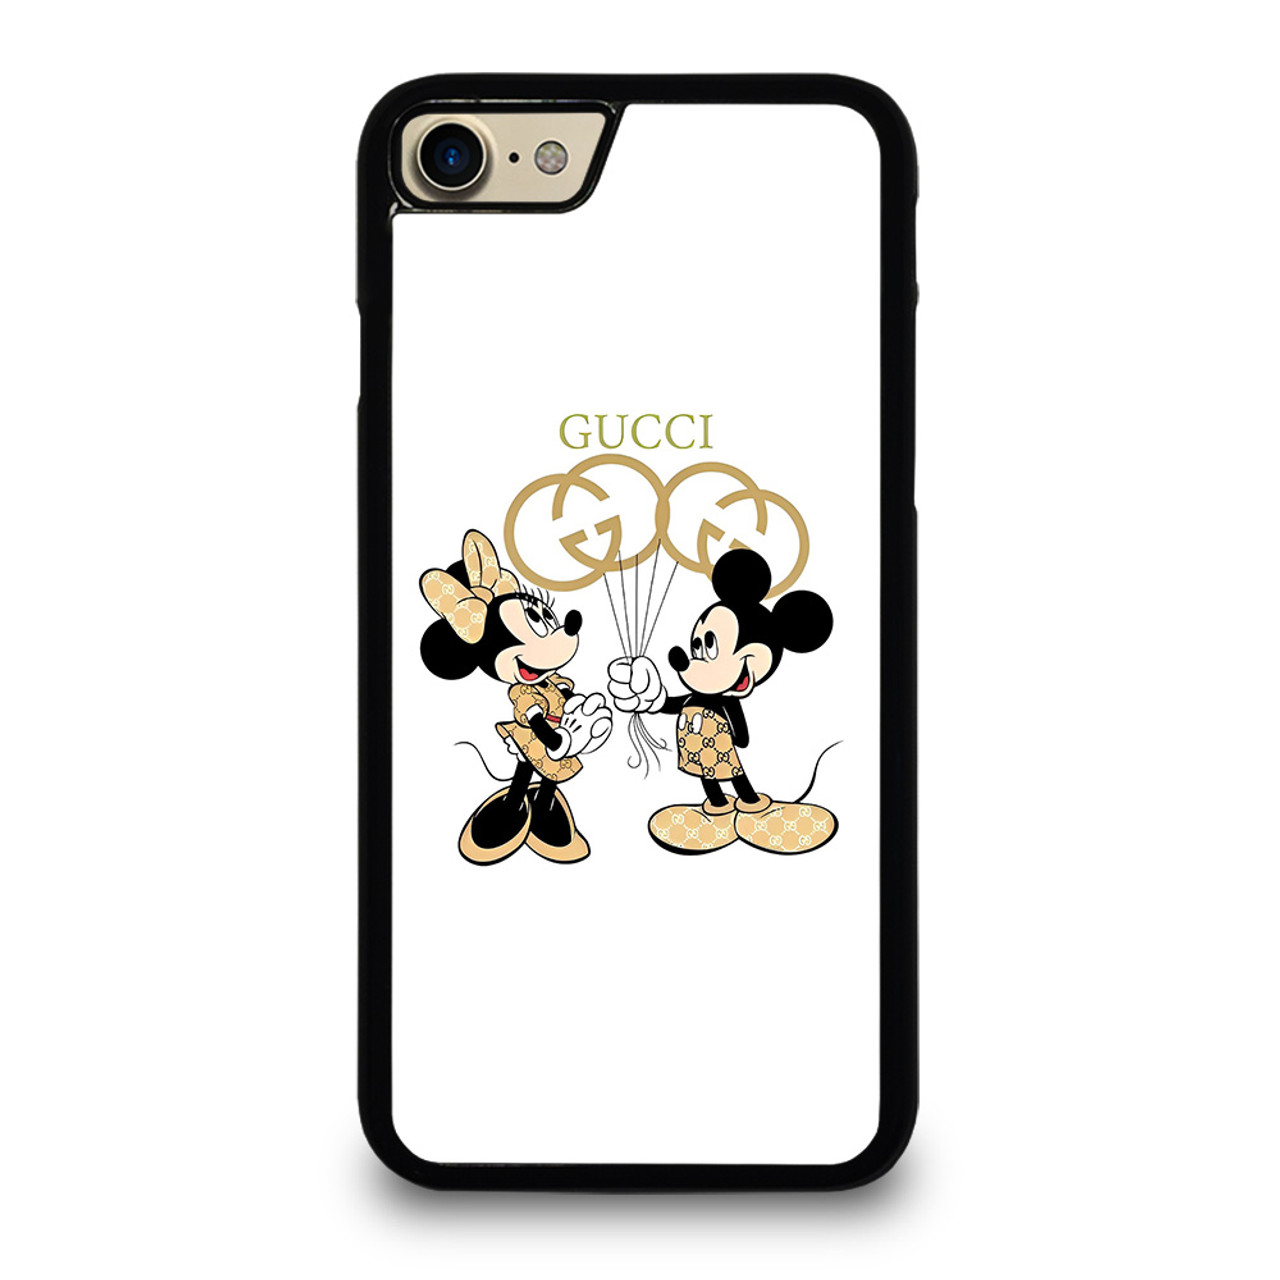 GUCCI MICKEY MINNIE MOUSE BALLOON iPhone 7 / 8 Case Cover